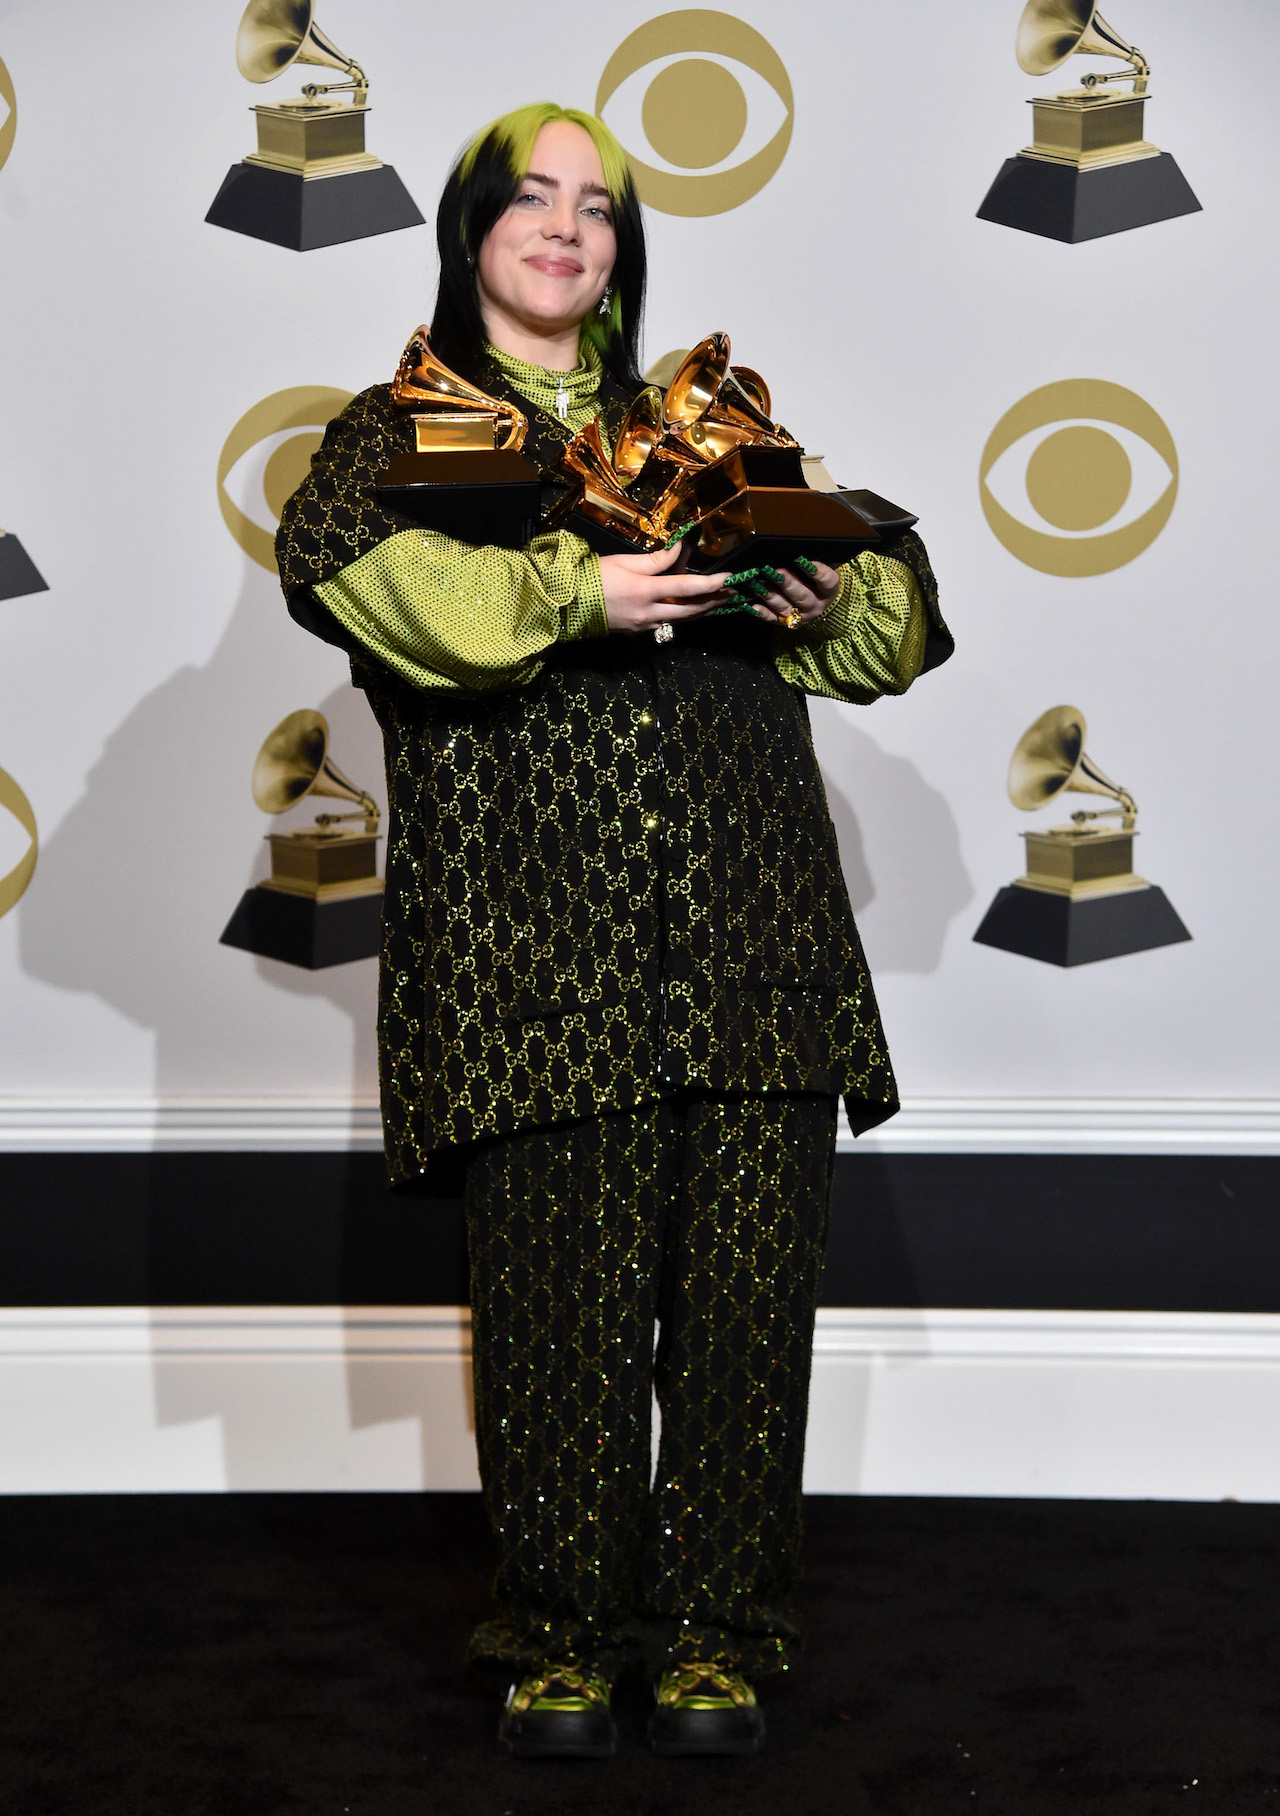 LOS ANGELES, CALIFORNIA – JANUARY 26: Billie Eilish, Record of the Year winner for 